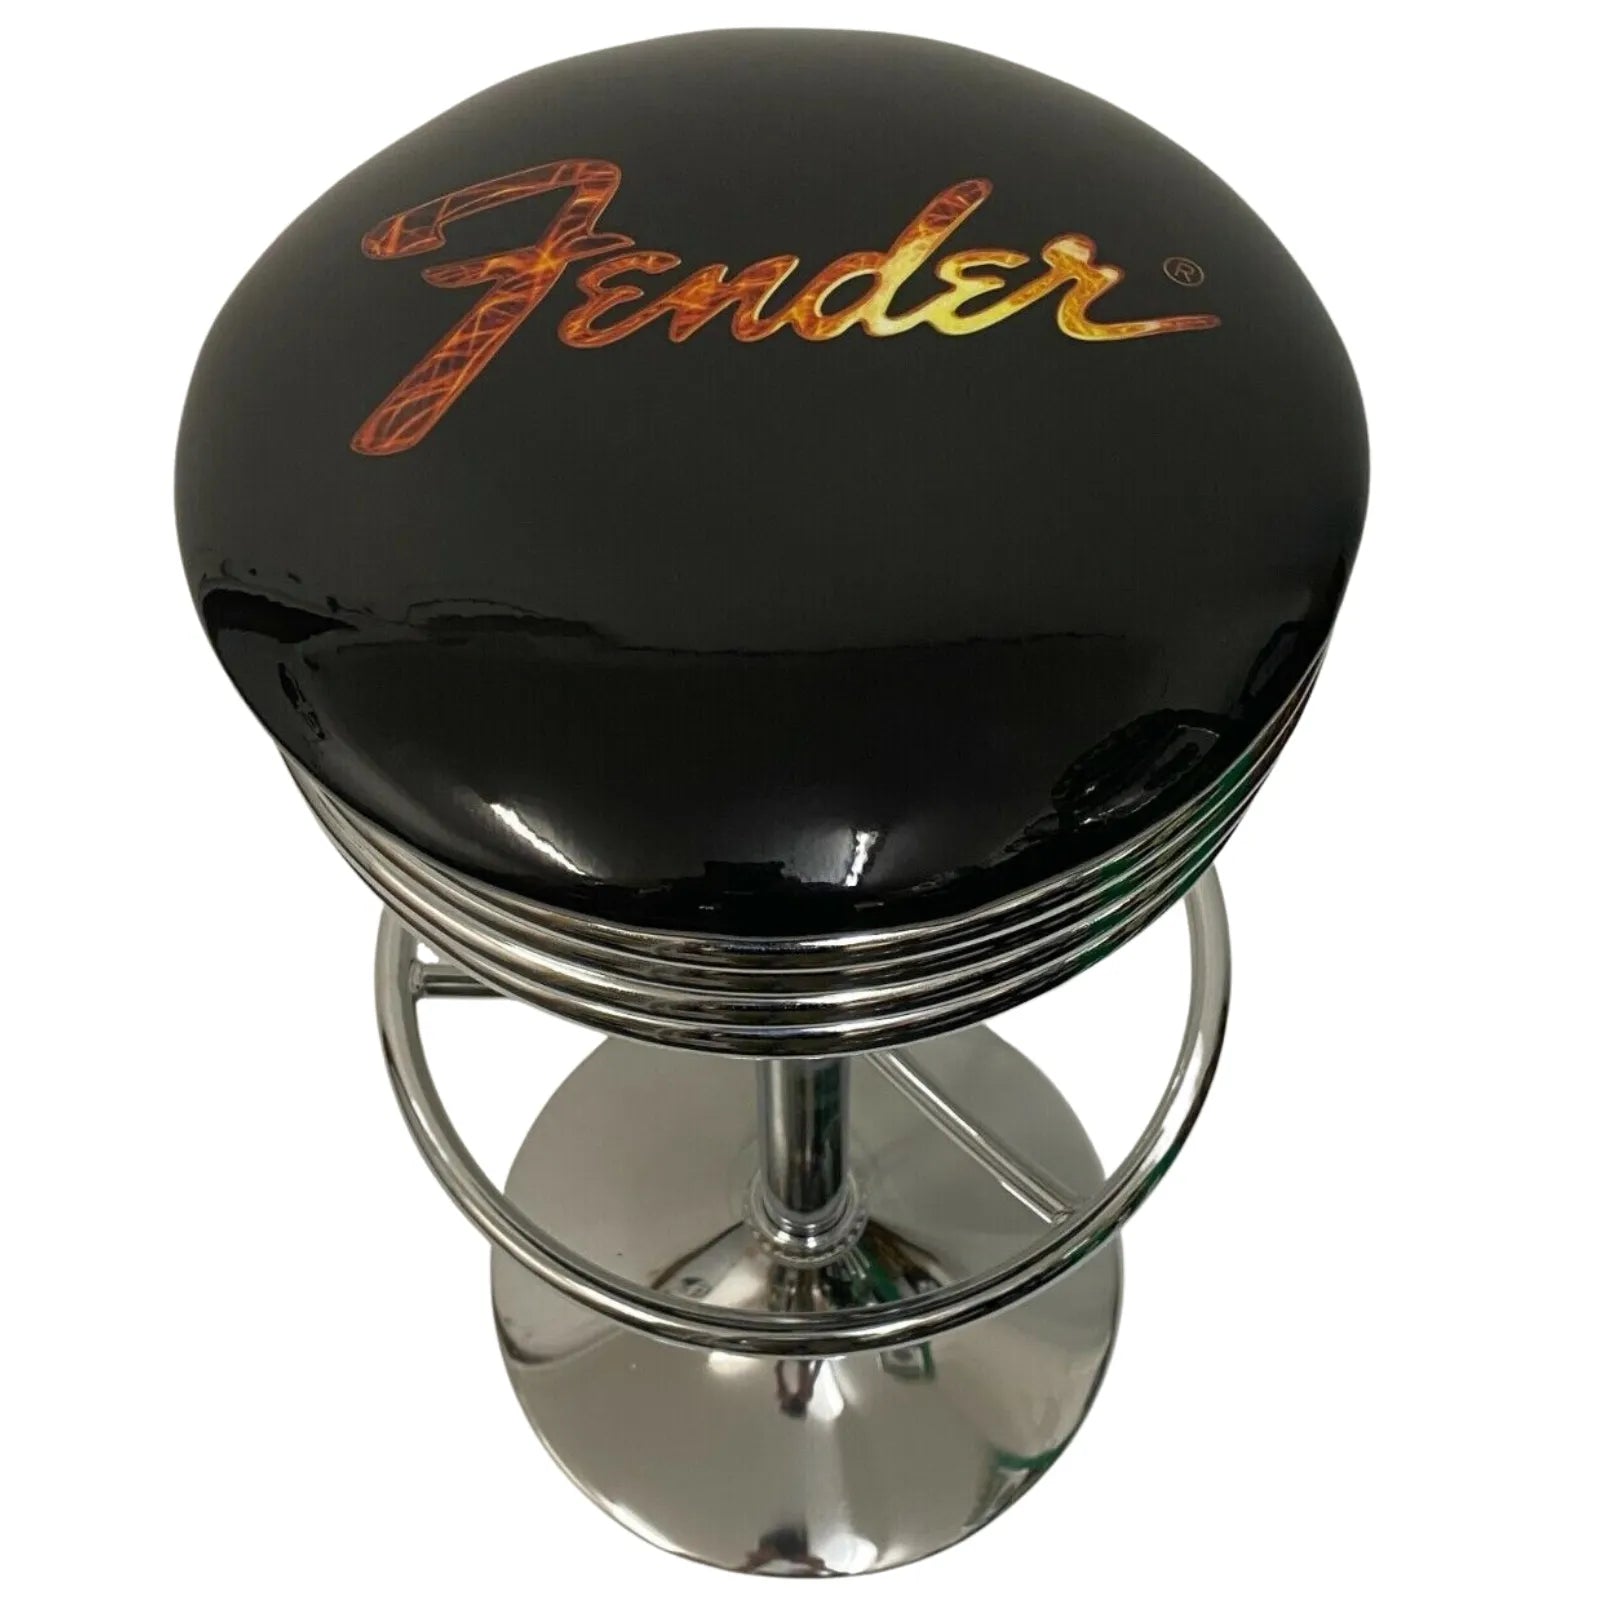 Fender Stainless Steel Gas-Lift Adjustable Bar Stool - KING CAVE